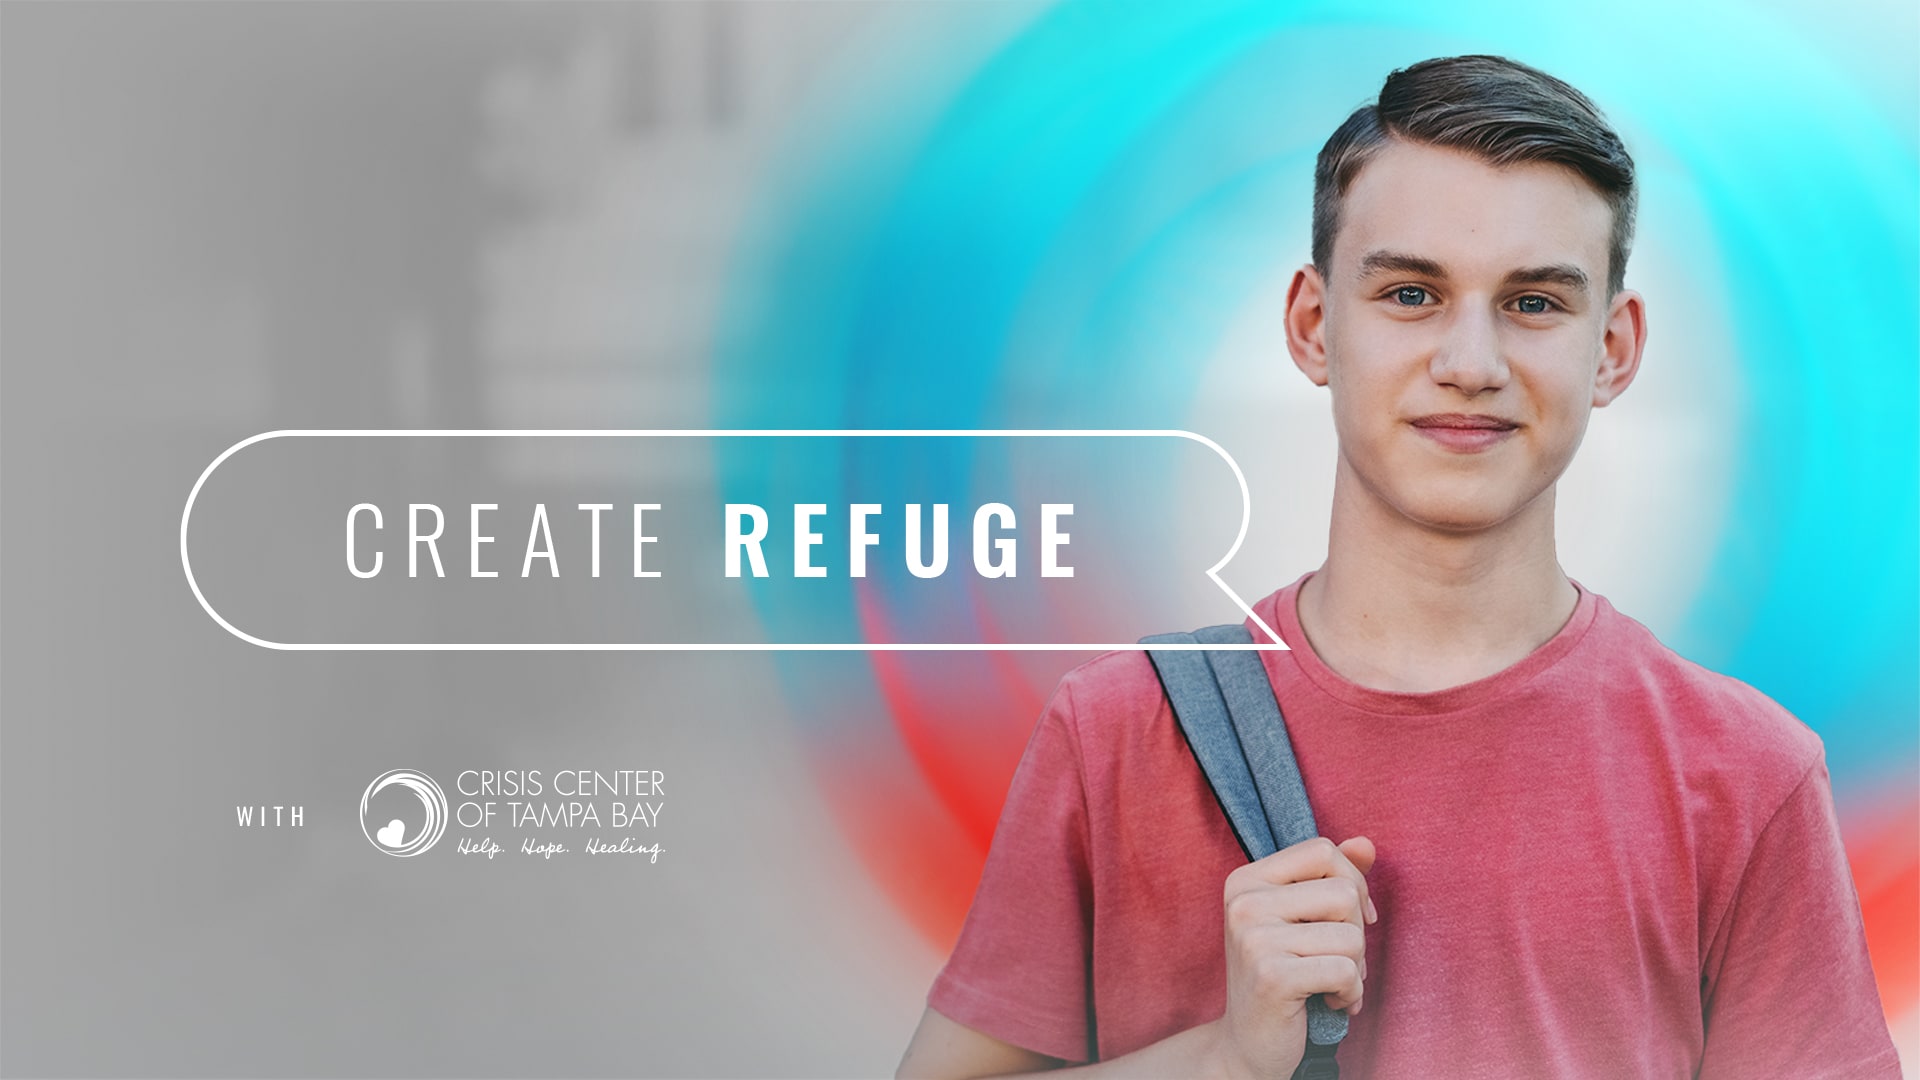 Create Refuge with the Crisis Center of Tampa Bay